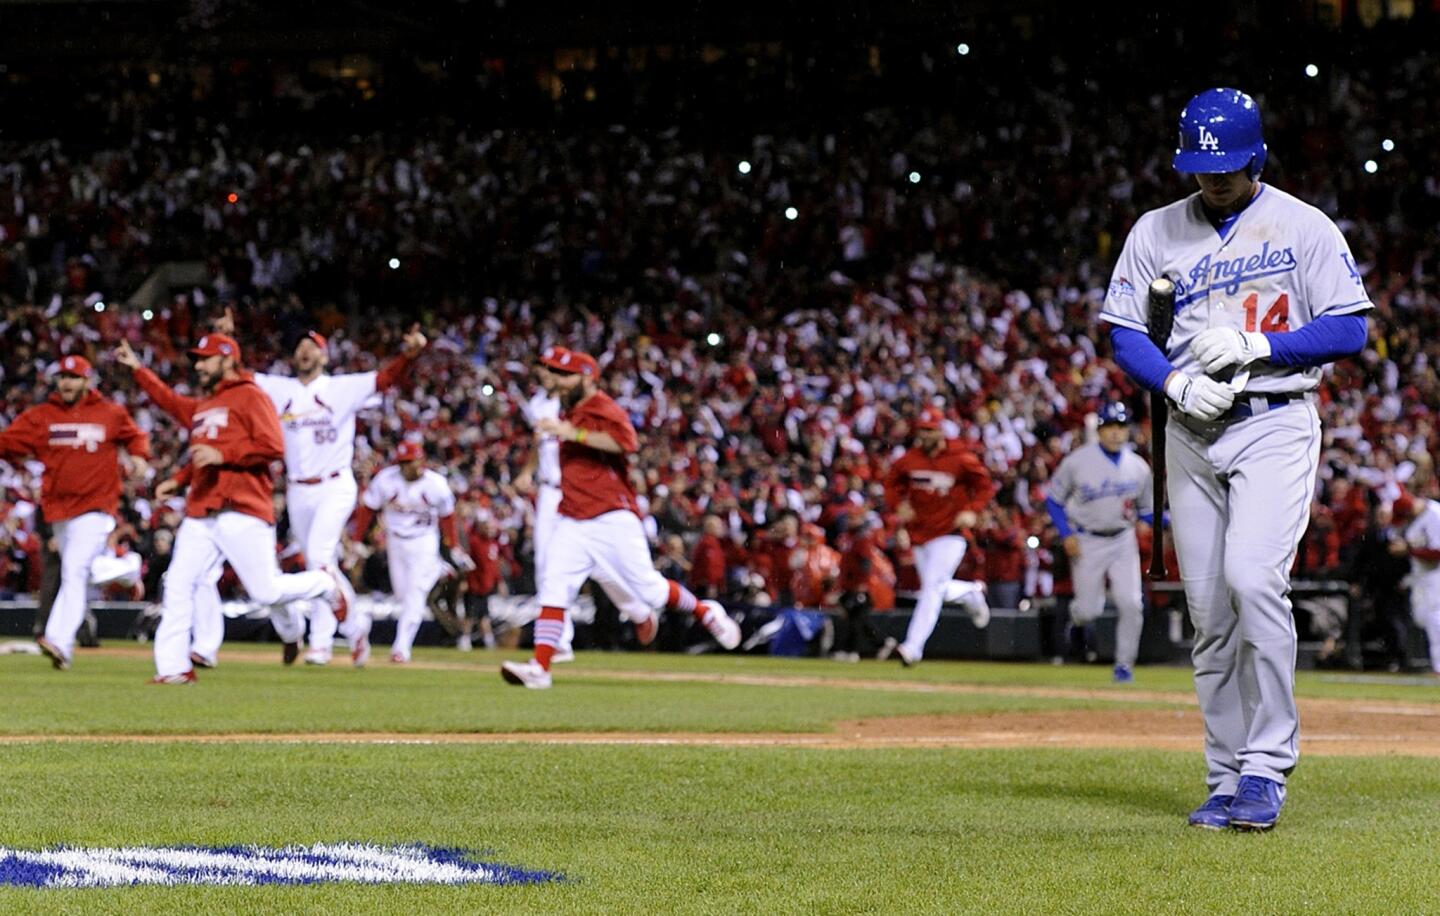 Dodgers second baseman Mark Ellis walks off the field after striking out to end the game as the St. Louis Cardinals celebrated their 9-0 win in Game 6 of the NLCS.